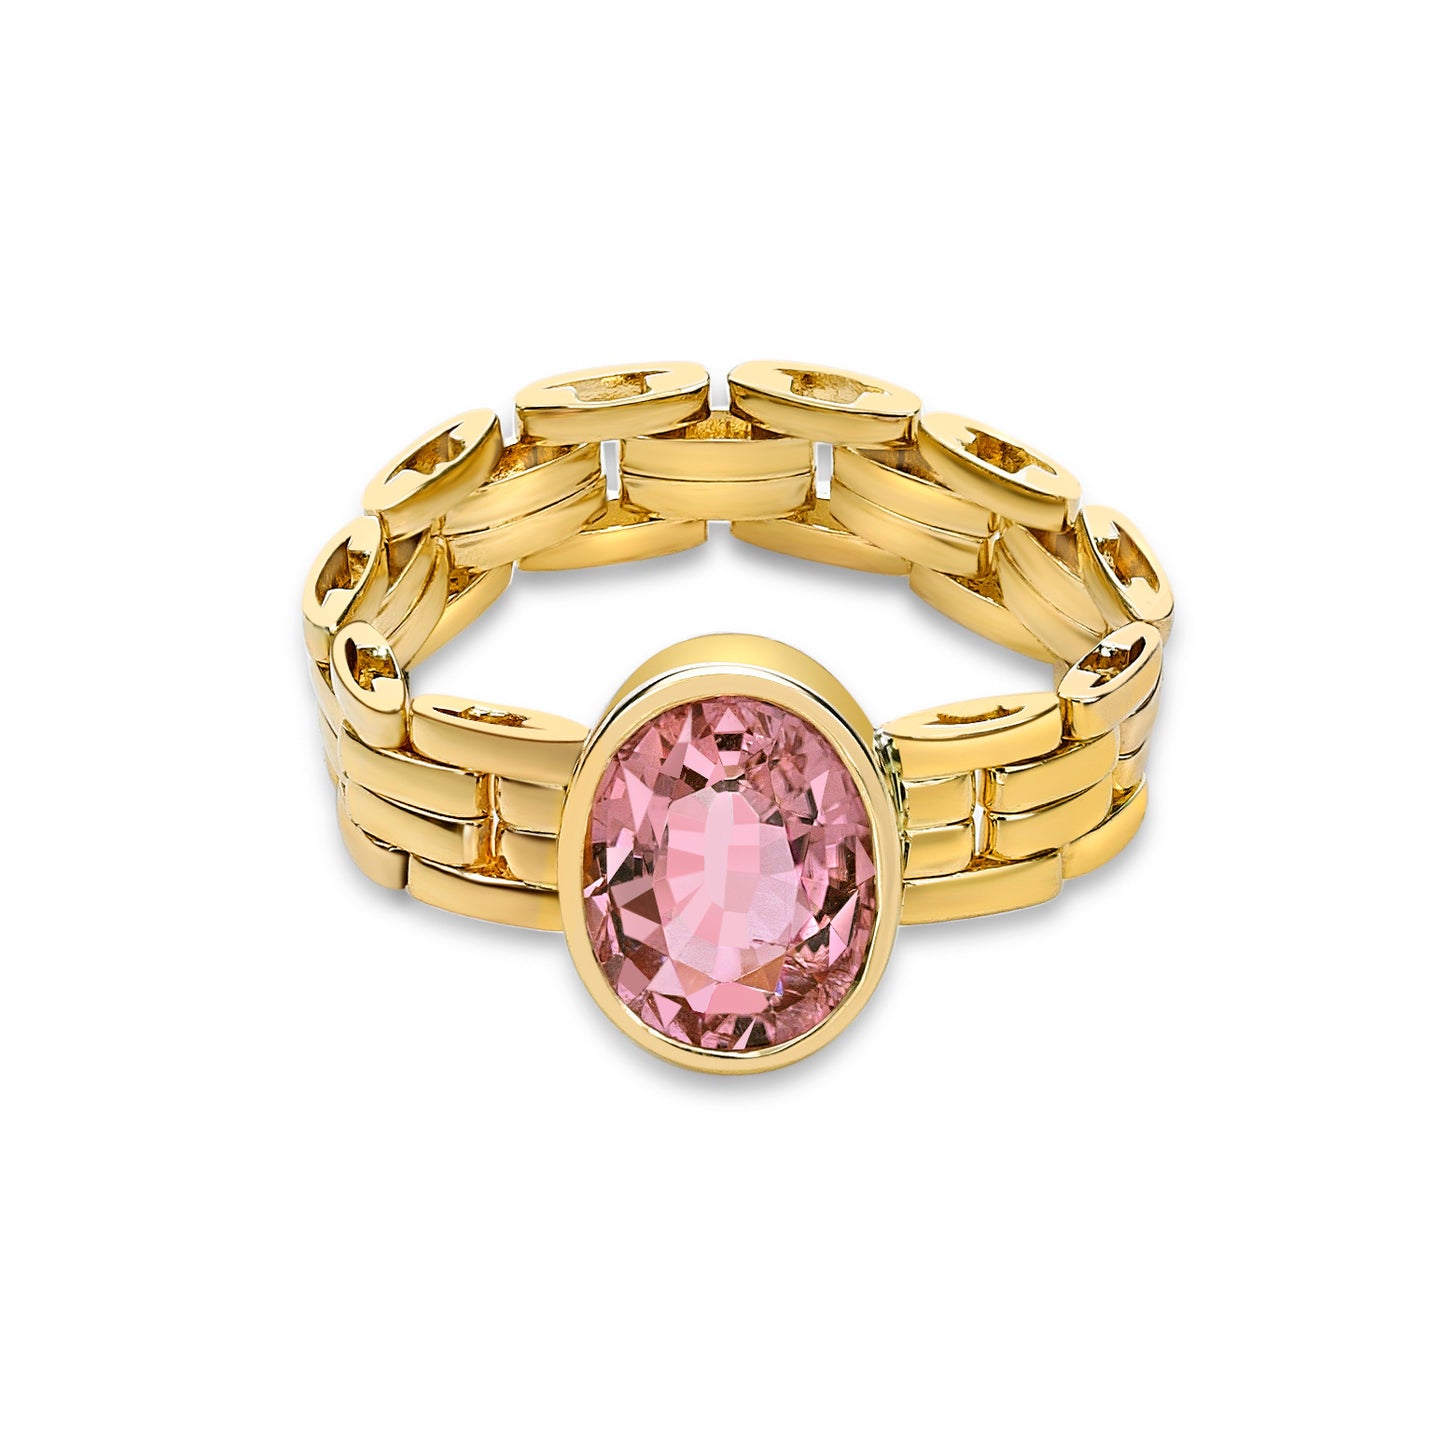 Chain Ring with Bezel set Oval Pink Tourmaline